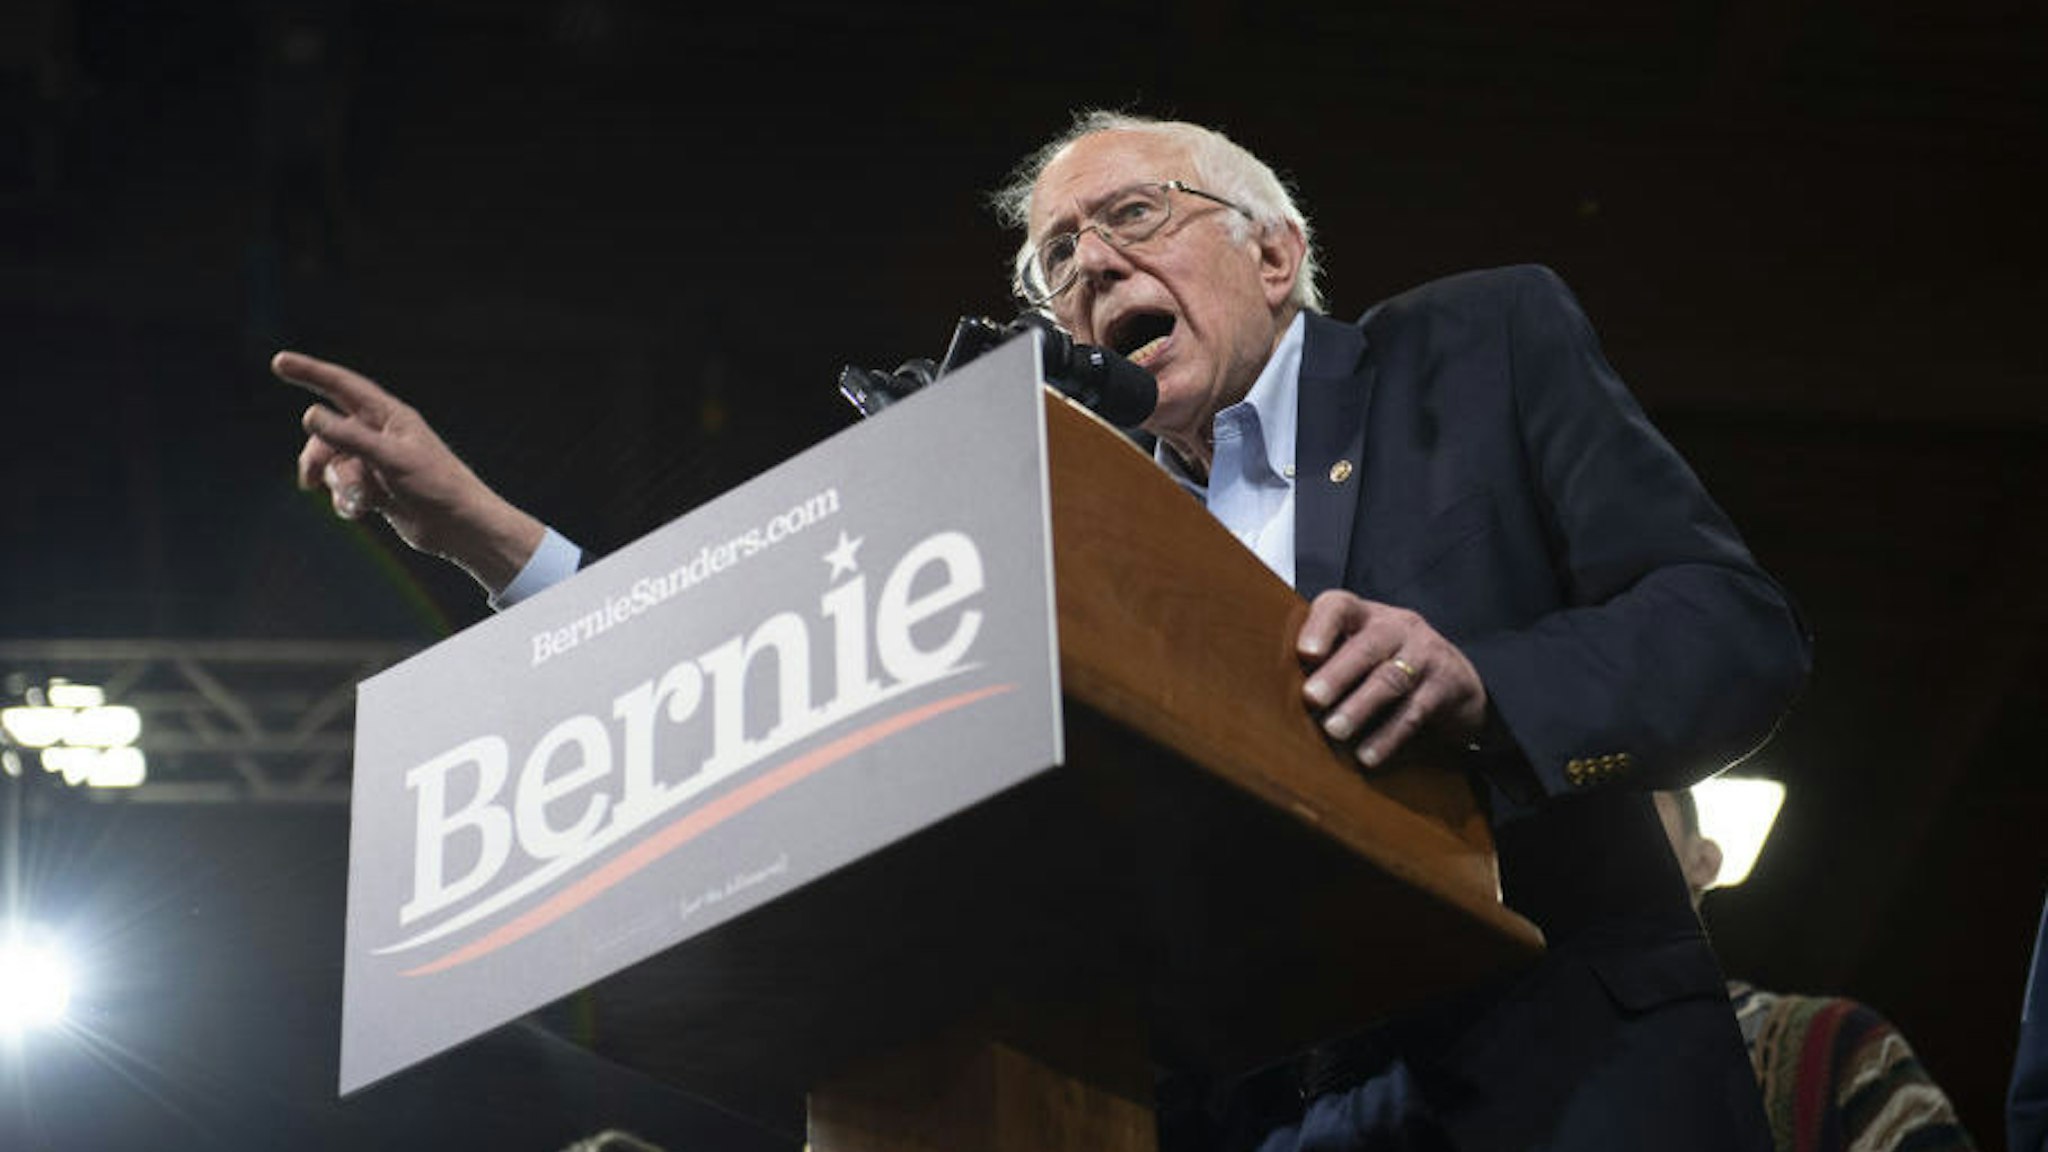 Senator Bernie Sanders, an Independent from Vermont and 2020 presidential candidate, speaks during a primary night rally in Essex Junction, Vermont, U.S., on Tuesday, March 3, 2020. The biggest day of the presidential primary calendar will define the nomination fight for Sanders and Joe Biden and determine whether Michael Bloomberg and Elizabeth Warren have a rationale for carrying on their campaigns. Photographer: Kate Flock/Bloomberg